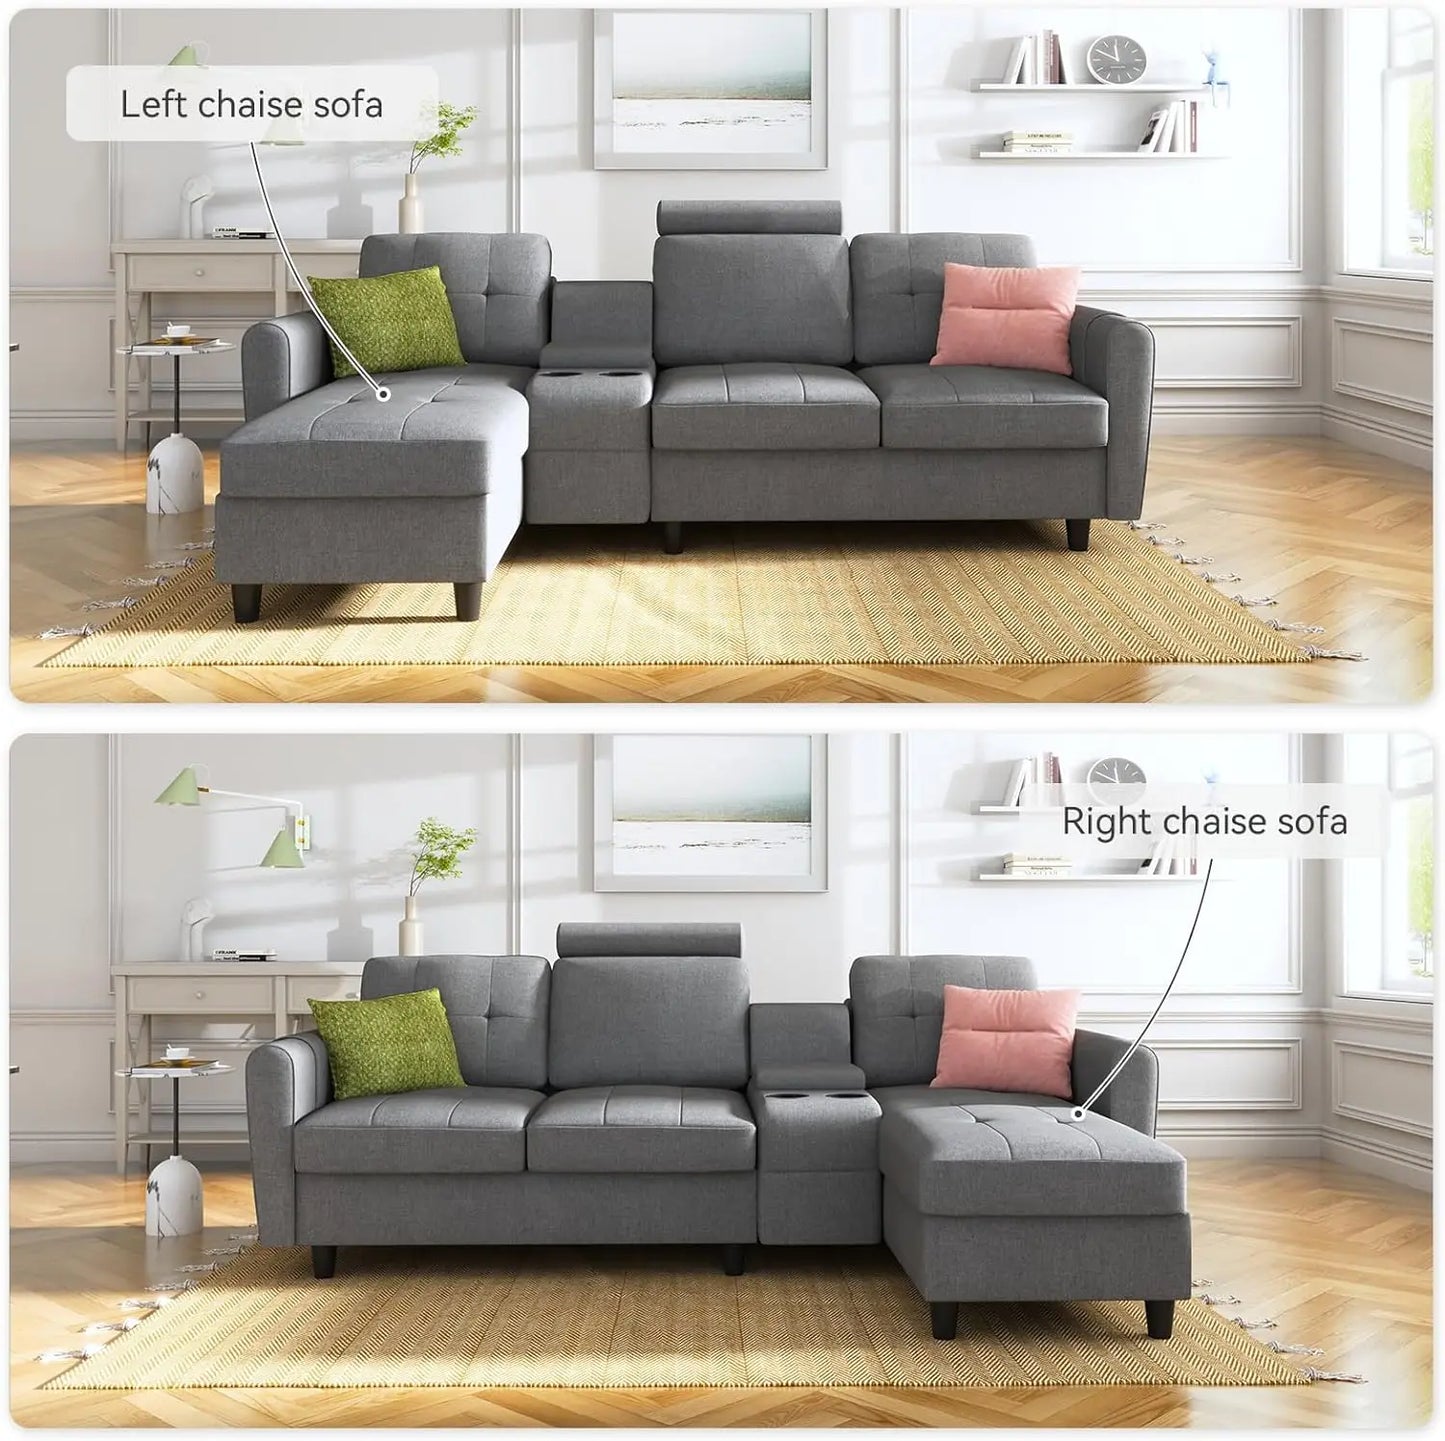 Convertible Sectional Couch L Shaped Sofa with Cup Holders, Modern Sectional Sofa 4-Seat Sofa with Reversible Chaise, Gray